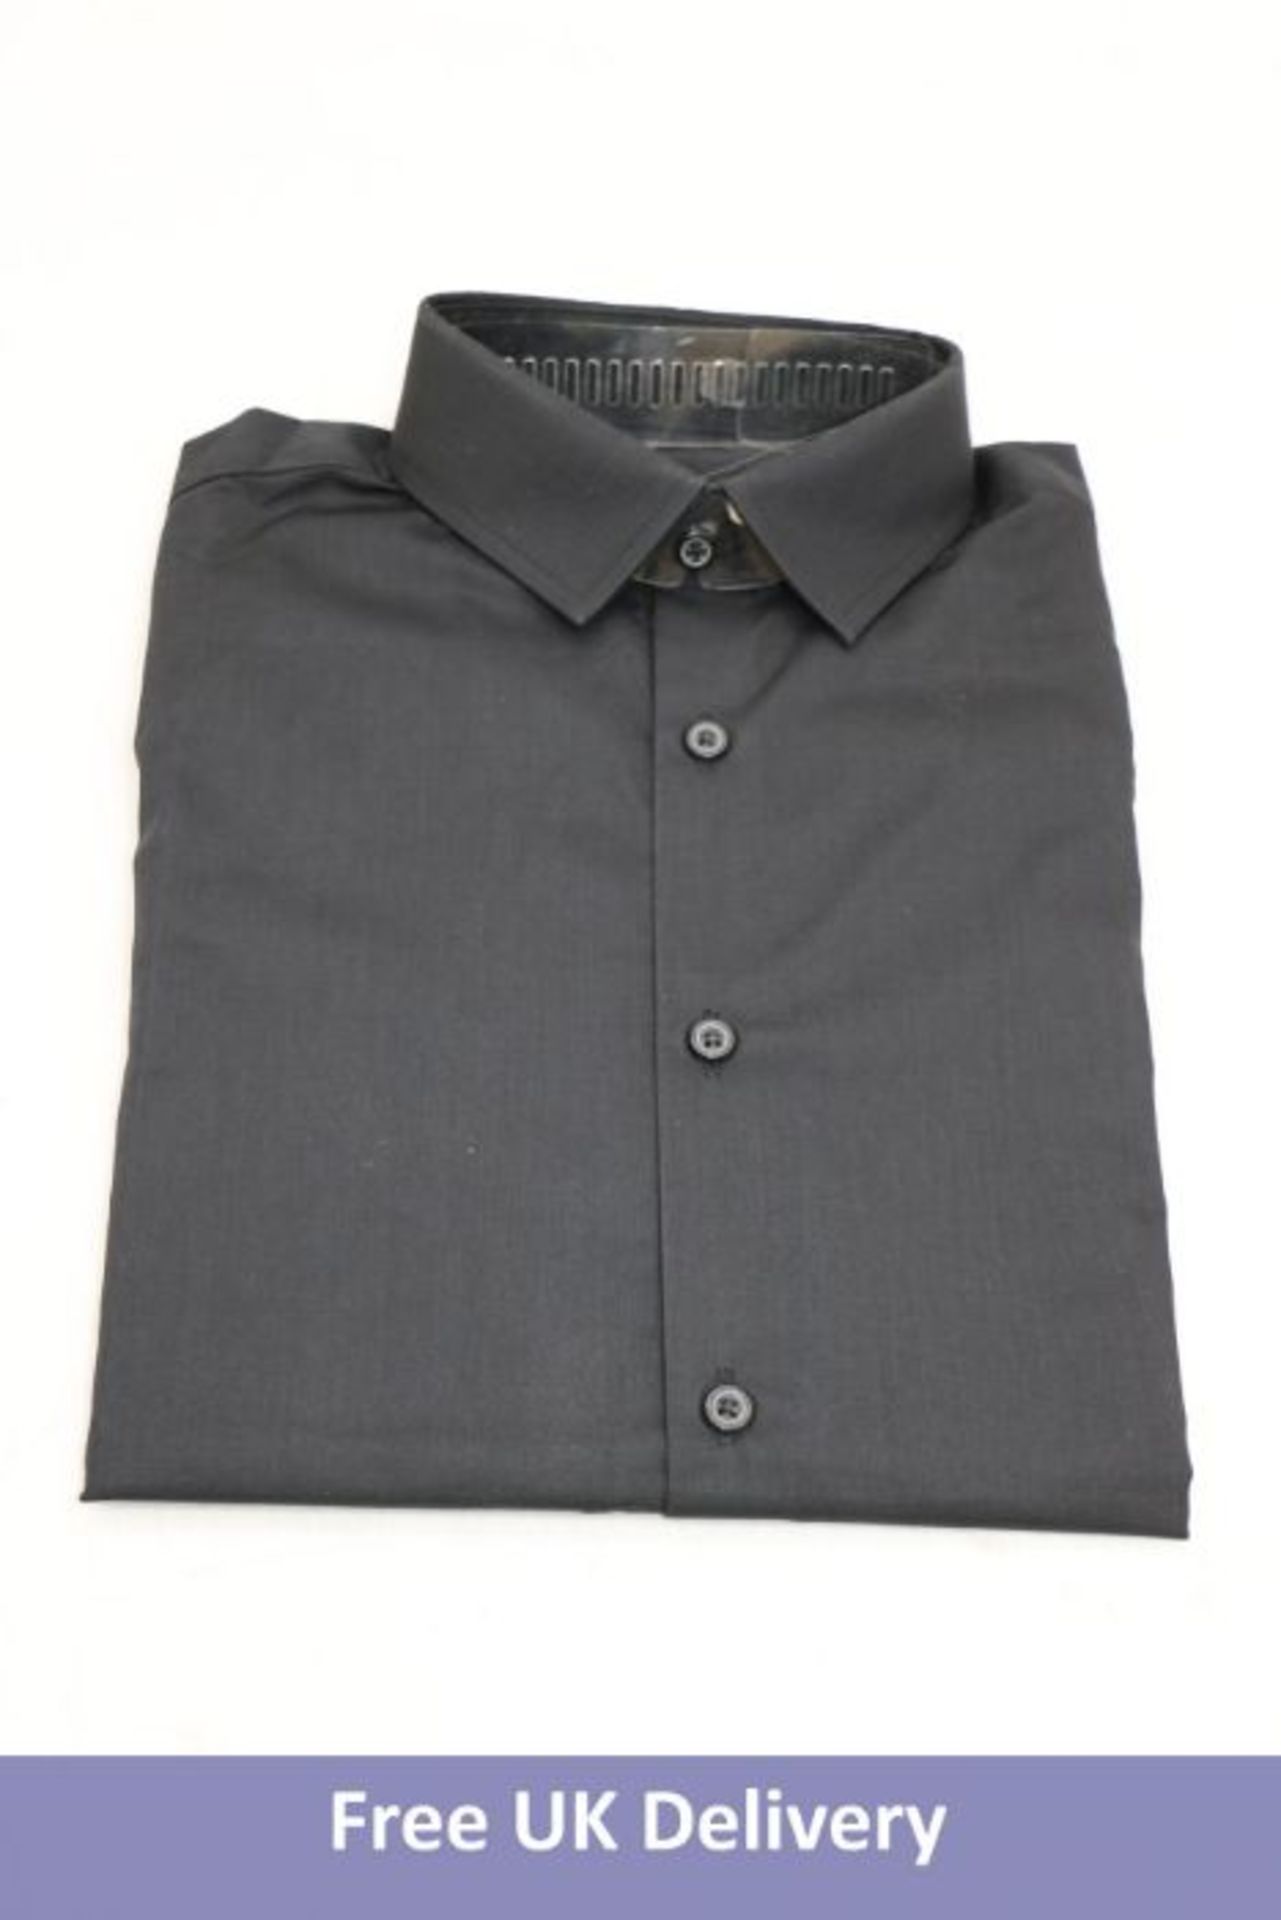 Five Simon Jersey Men's SS Shirt, Black, Size to include 2x 15 2x 14.5 And 1x Size 16